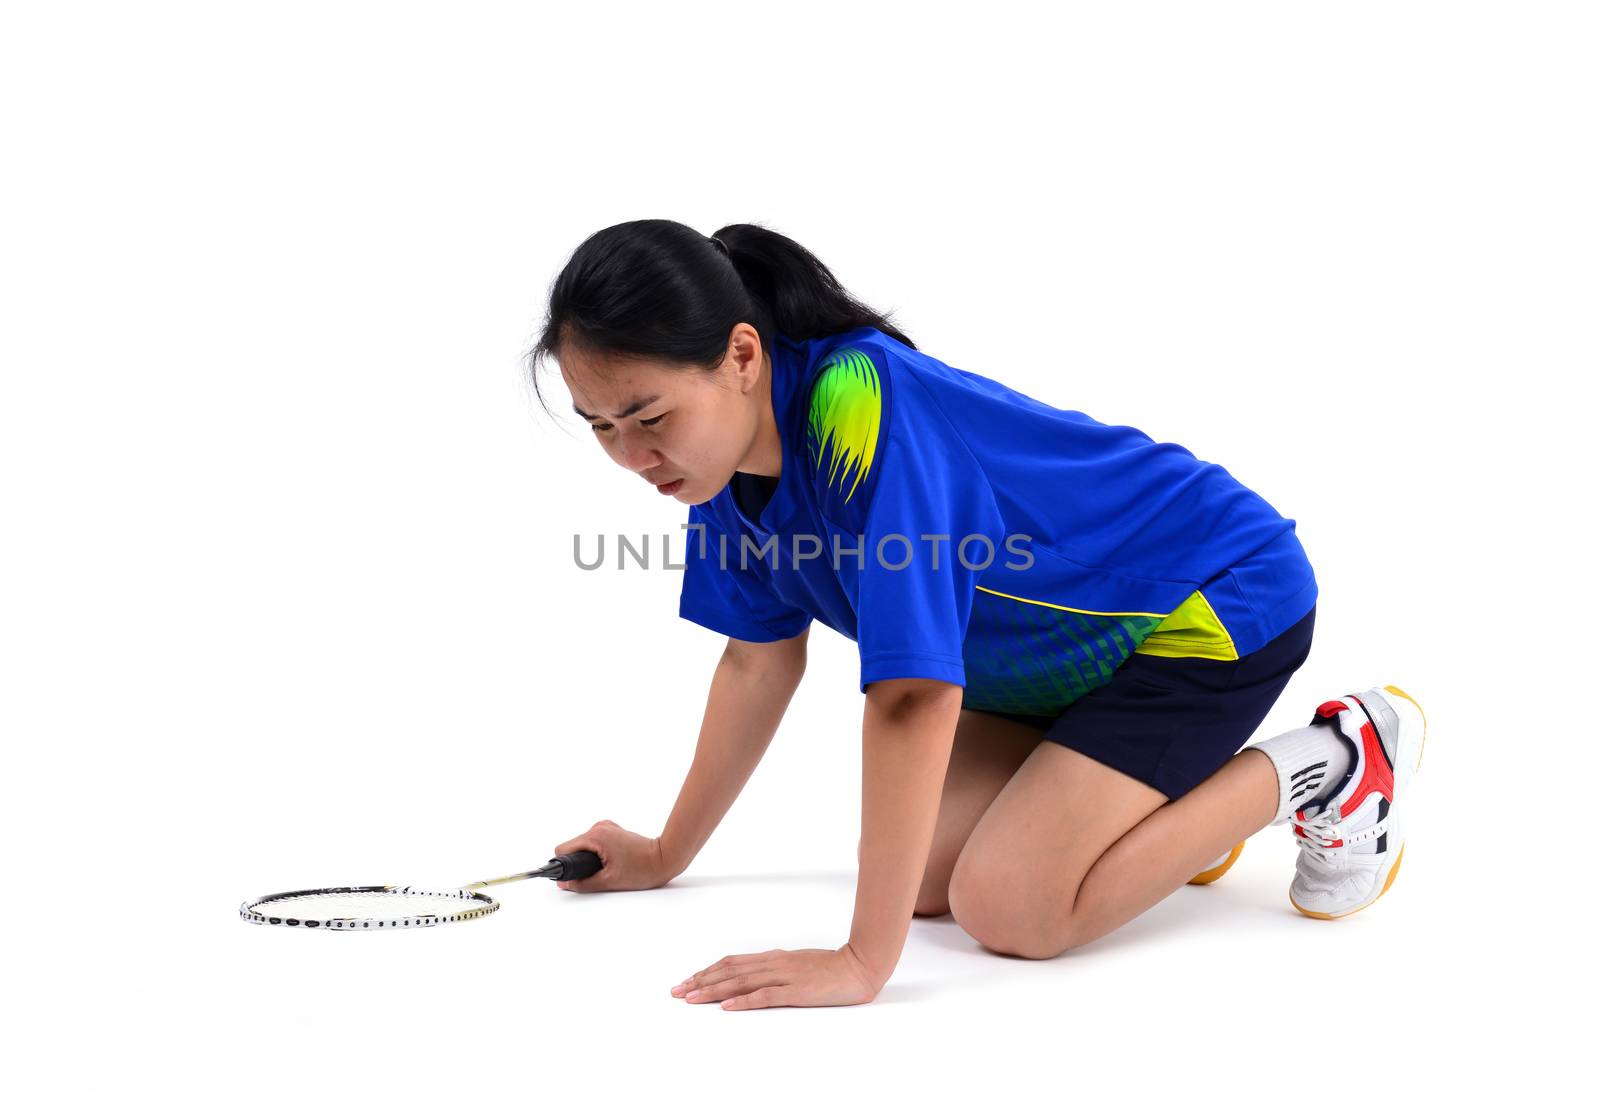 badminton player in action by anankkml